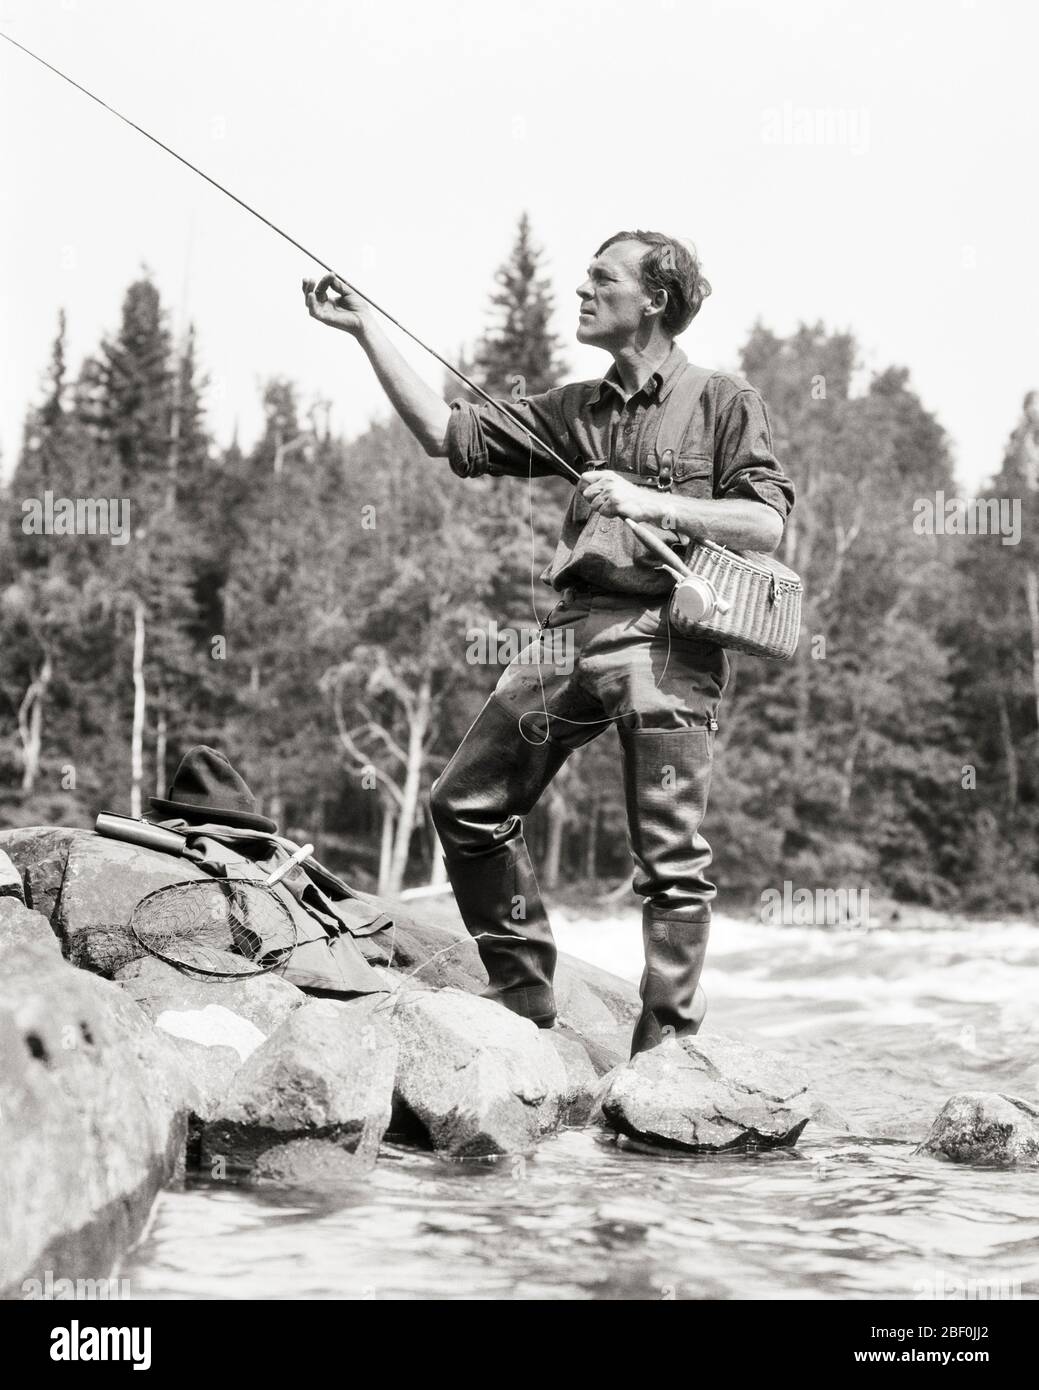 https://c8.alamy.com/comp/2BF0JJ2/1920s-fisherman-adjusting-his-fishing-rod-before-casting-in-stream-in-canada-a867-har001-hars-relaxation-adjusting-black-and-white-caucasian-ethnicity-creel-har001-old-fashioned-2BF0JJ2.jpg